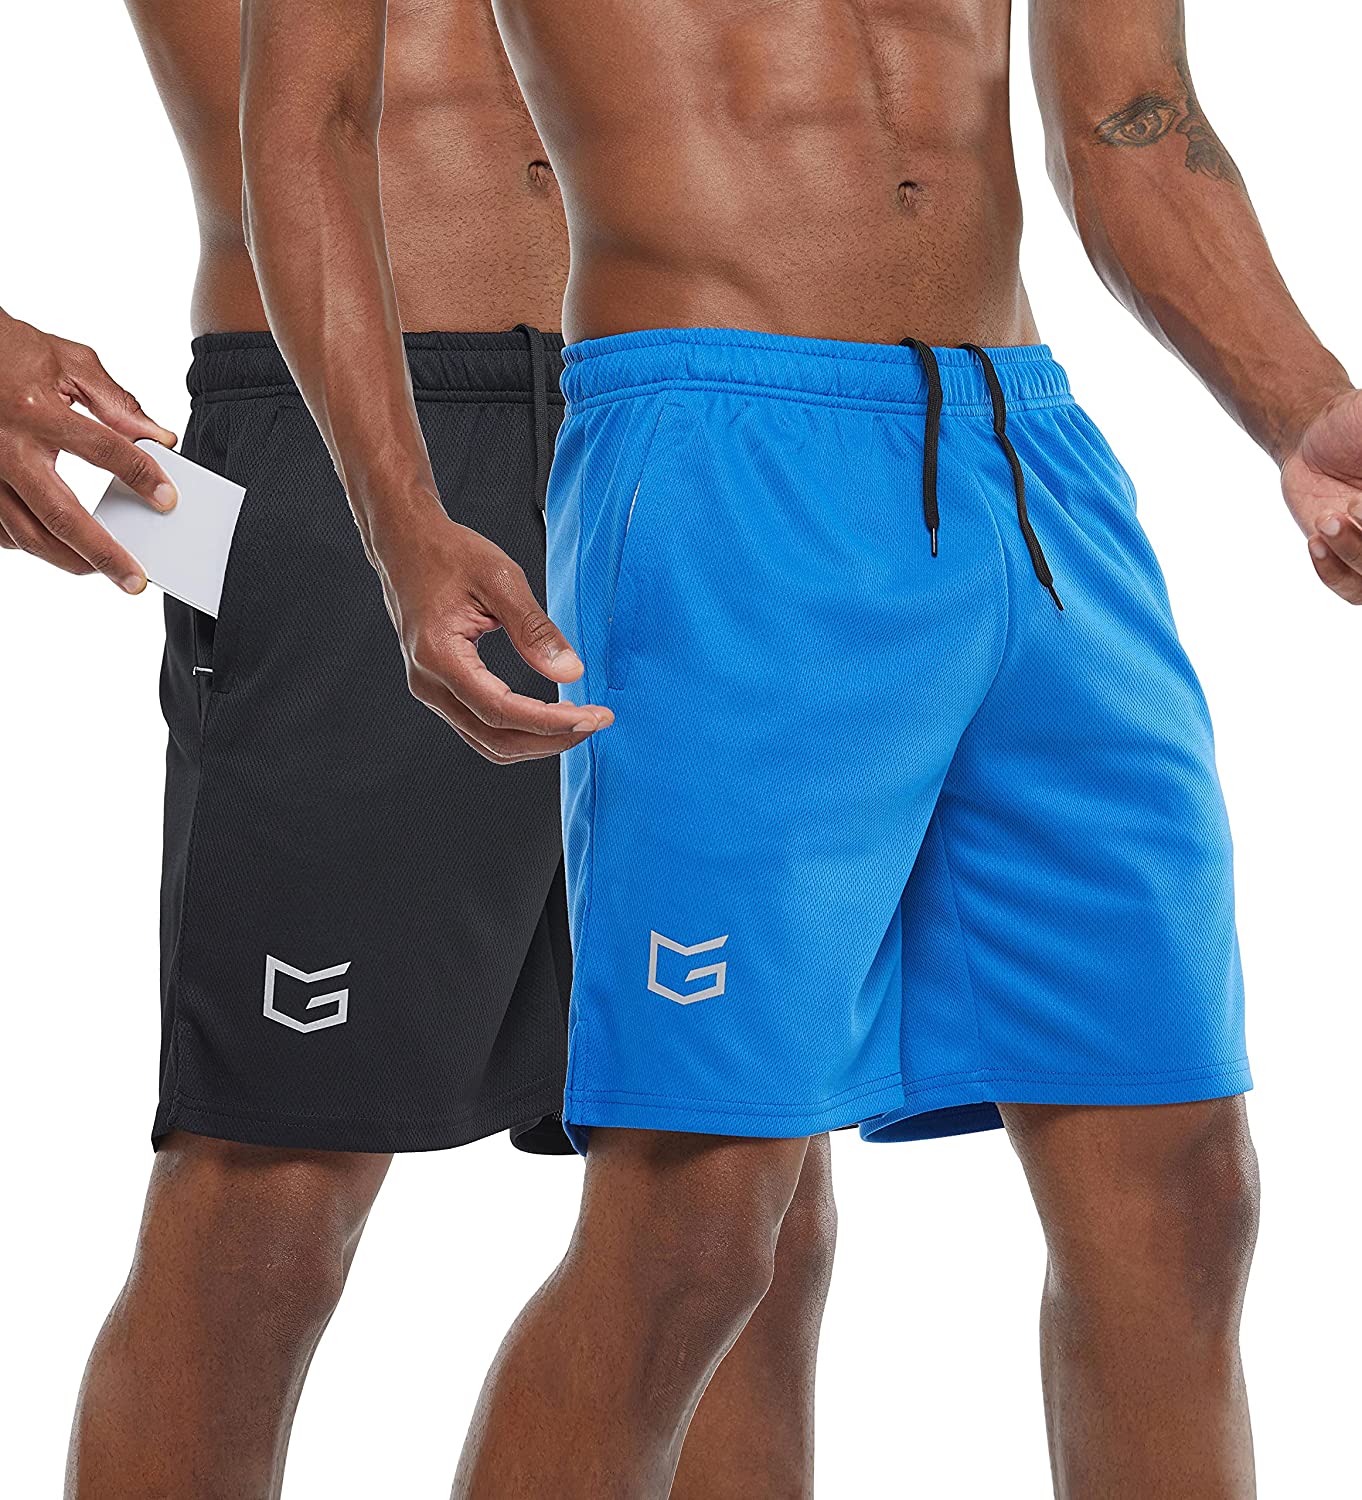 G Gradual Men's 7 Workout Running Shorts Quick Dry Lightweight Gym Shorts  with